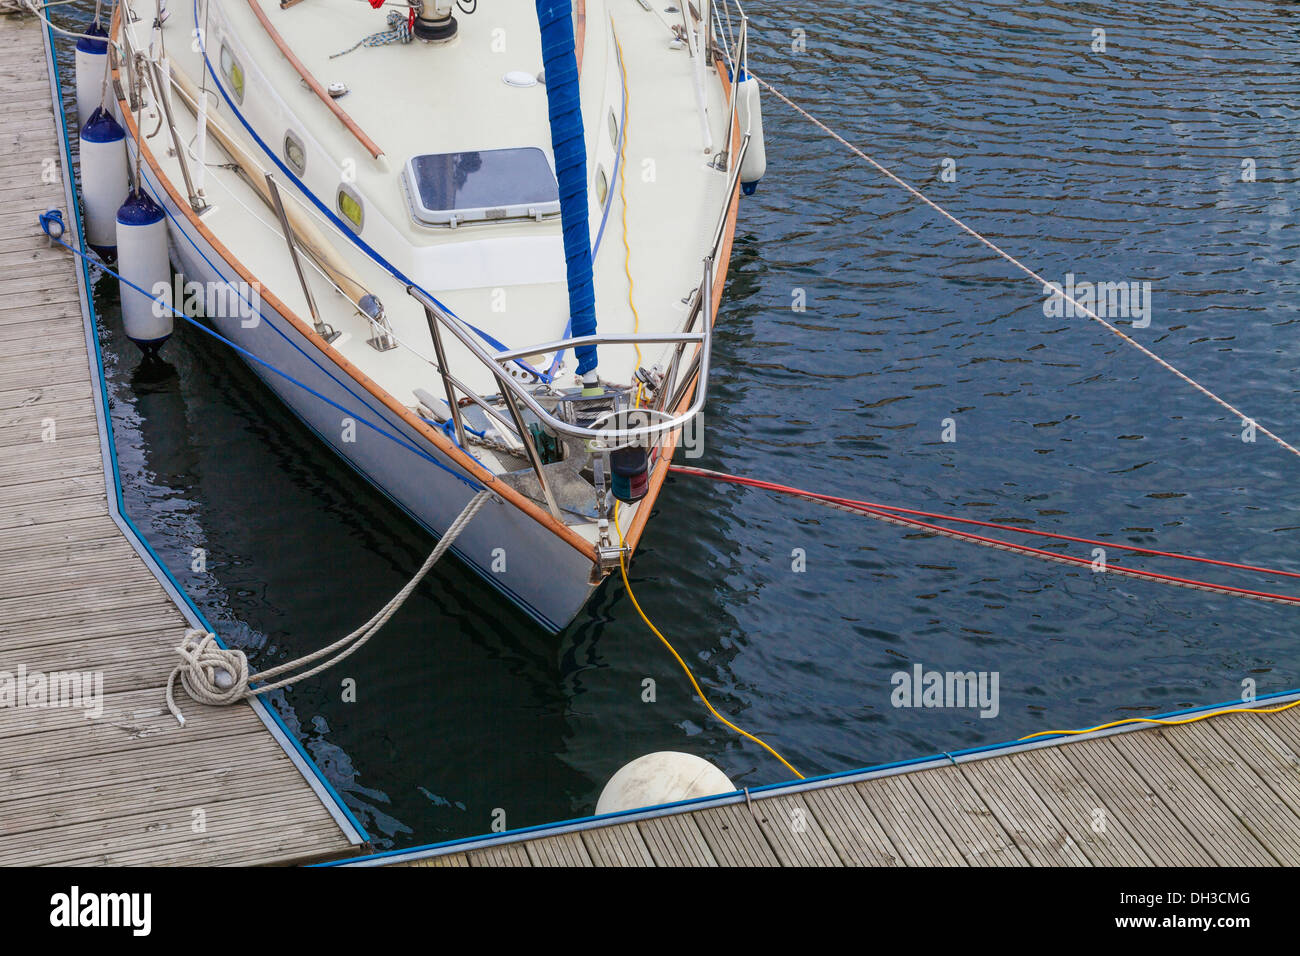 A small sailboat moored at Lossiemouth Harbour, Lossiemouth, Scotland. Stock Photo